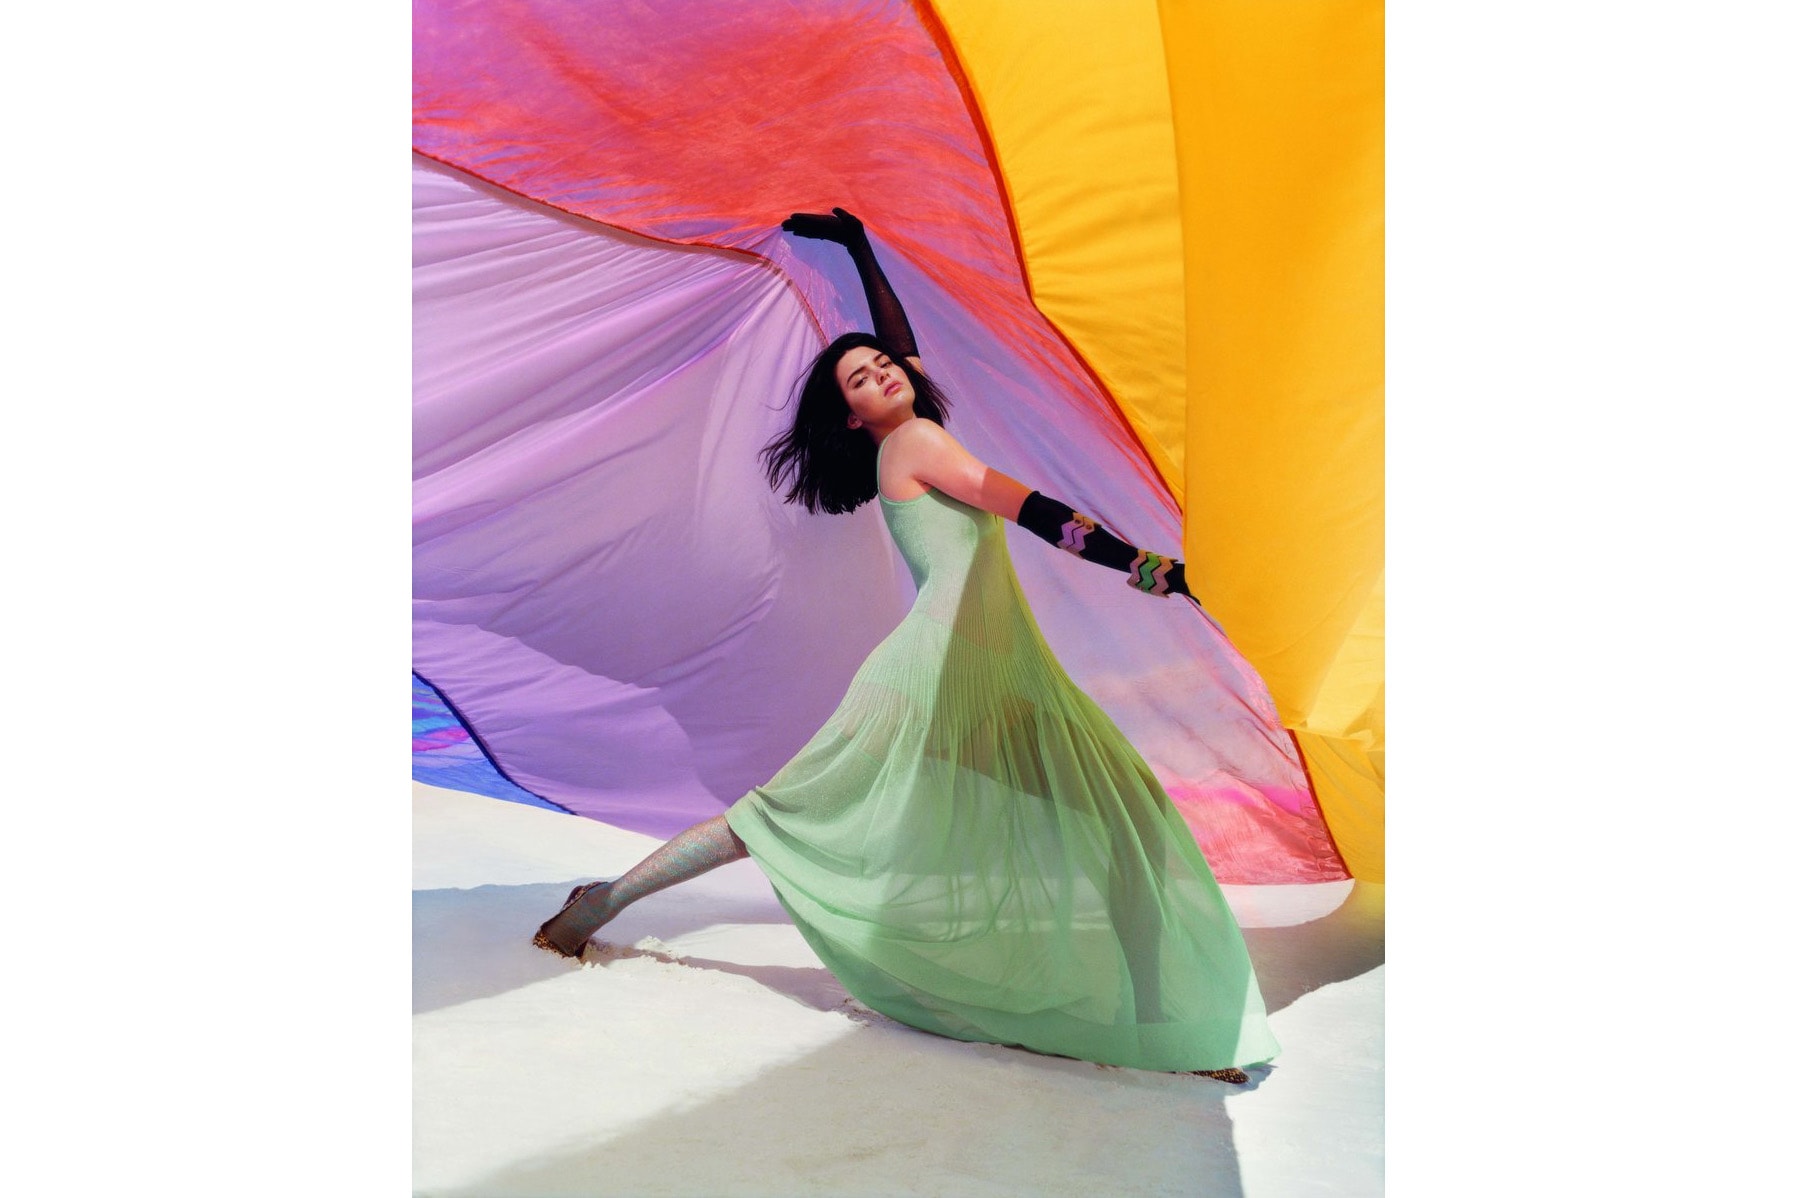 Kendall Jenner Missoni Colorful Spring Summer 2018 Photoshoot White Sands National Monument Campaign Ad